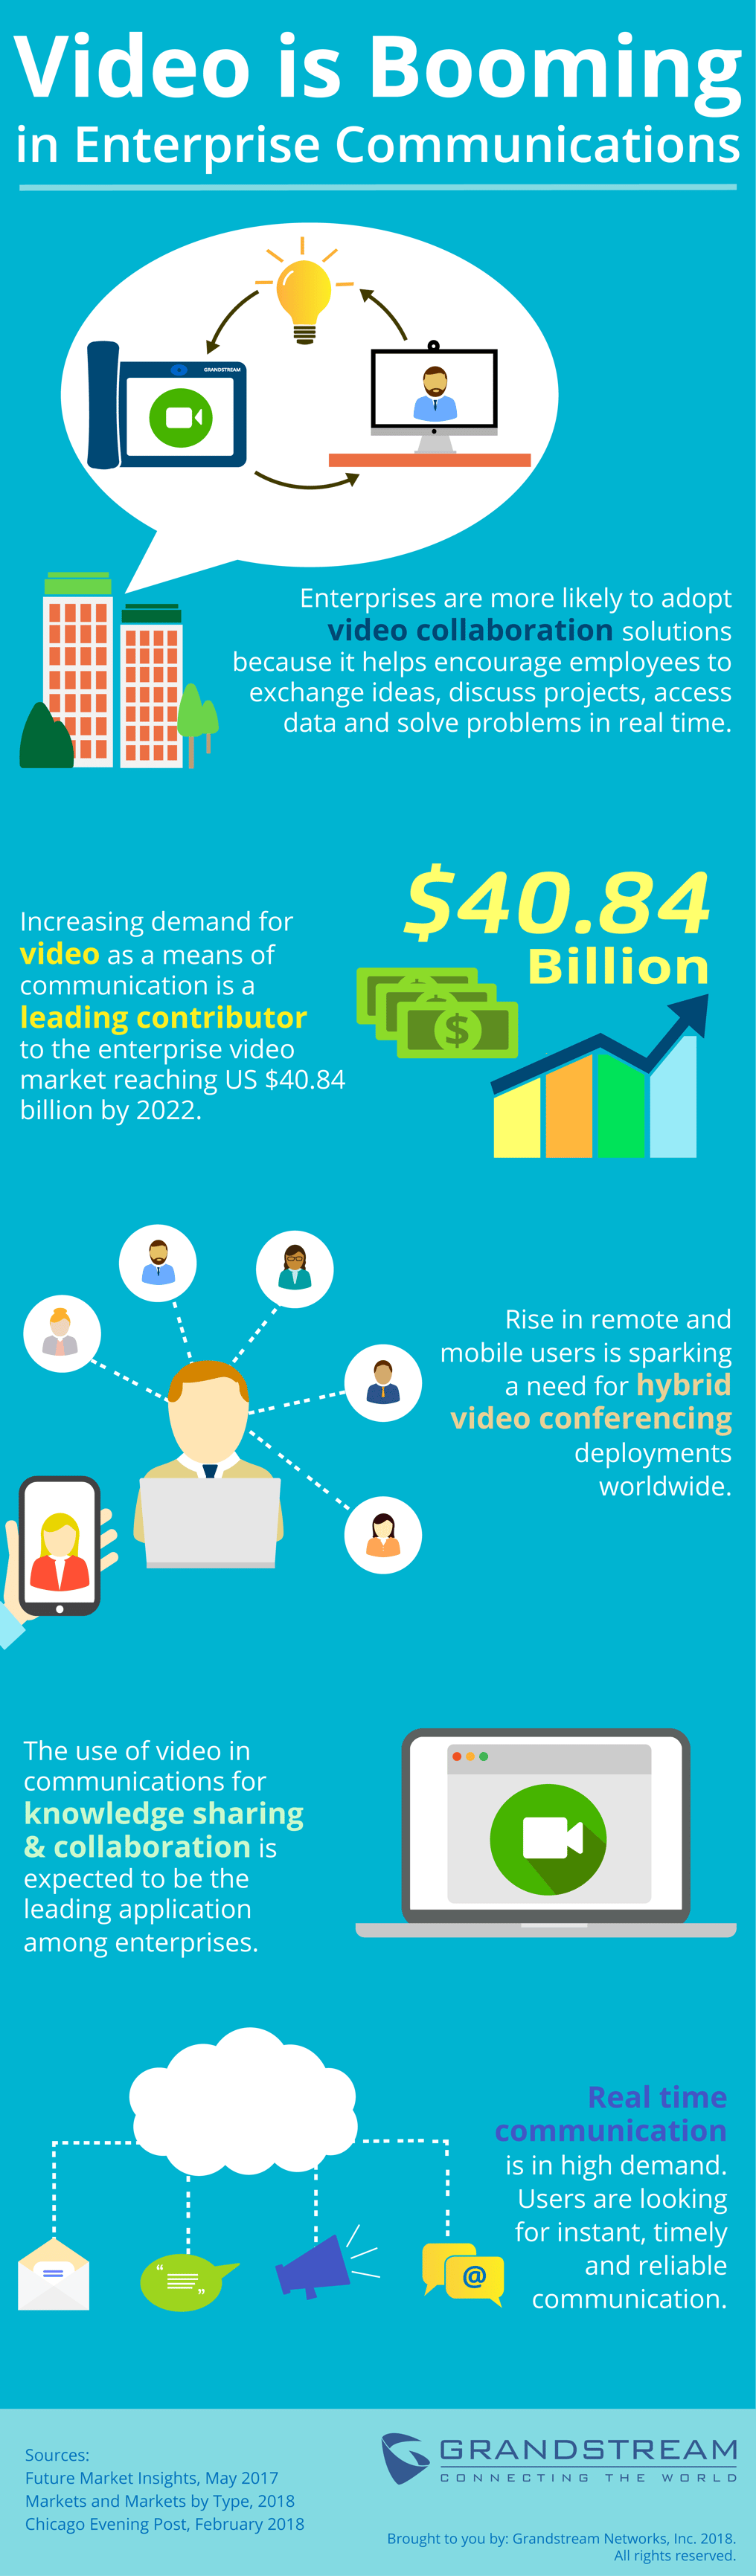 video_is_booming_infographic.png